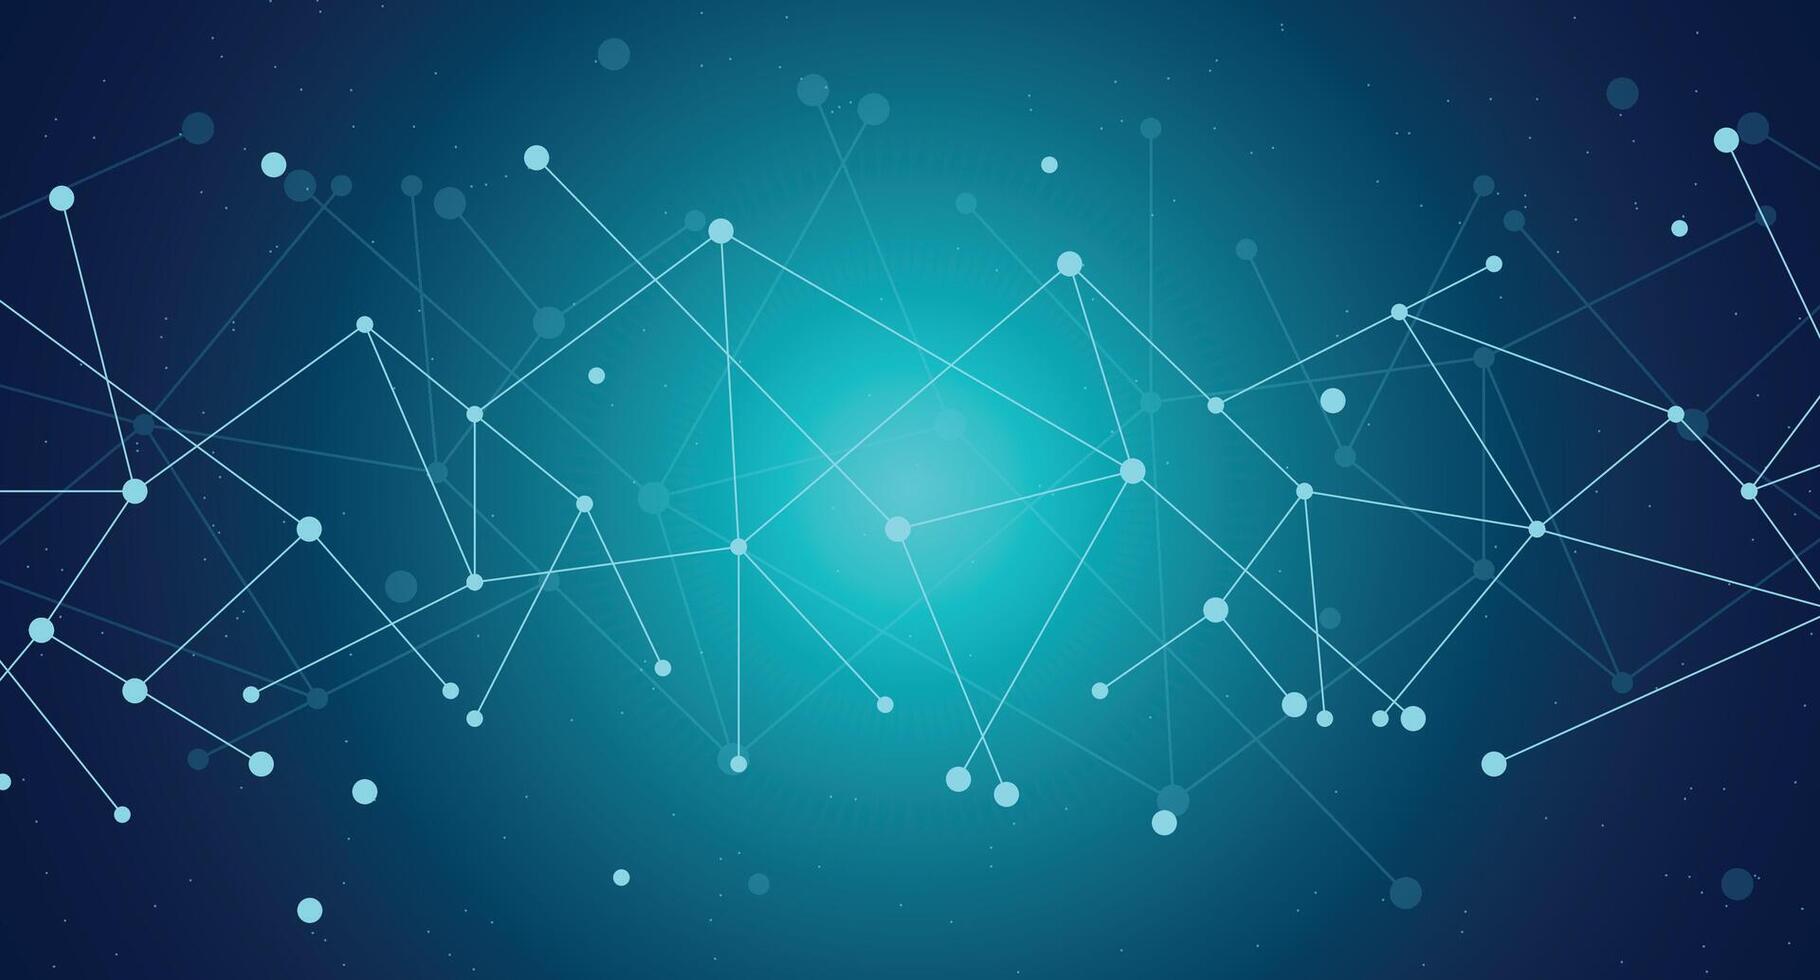 Abstract background. Connecting dots and lines. Big data visualization. Digital network connection. Technology background vector